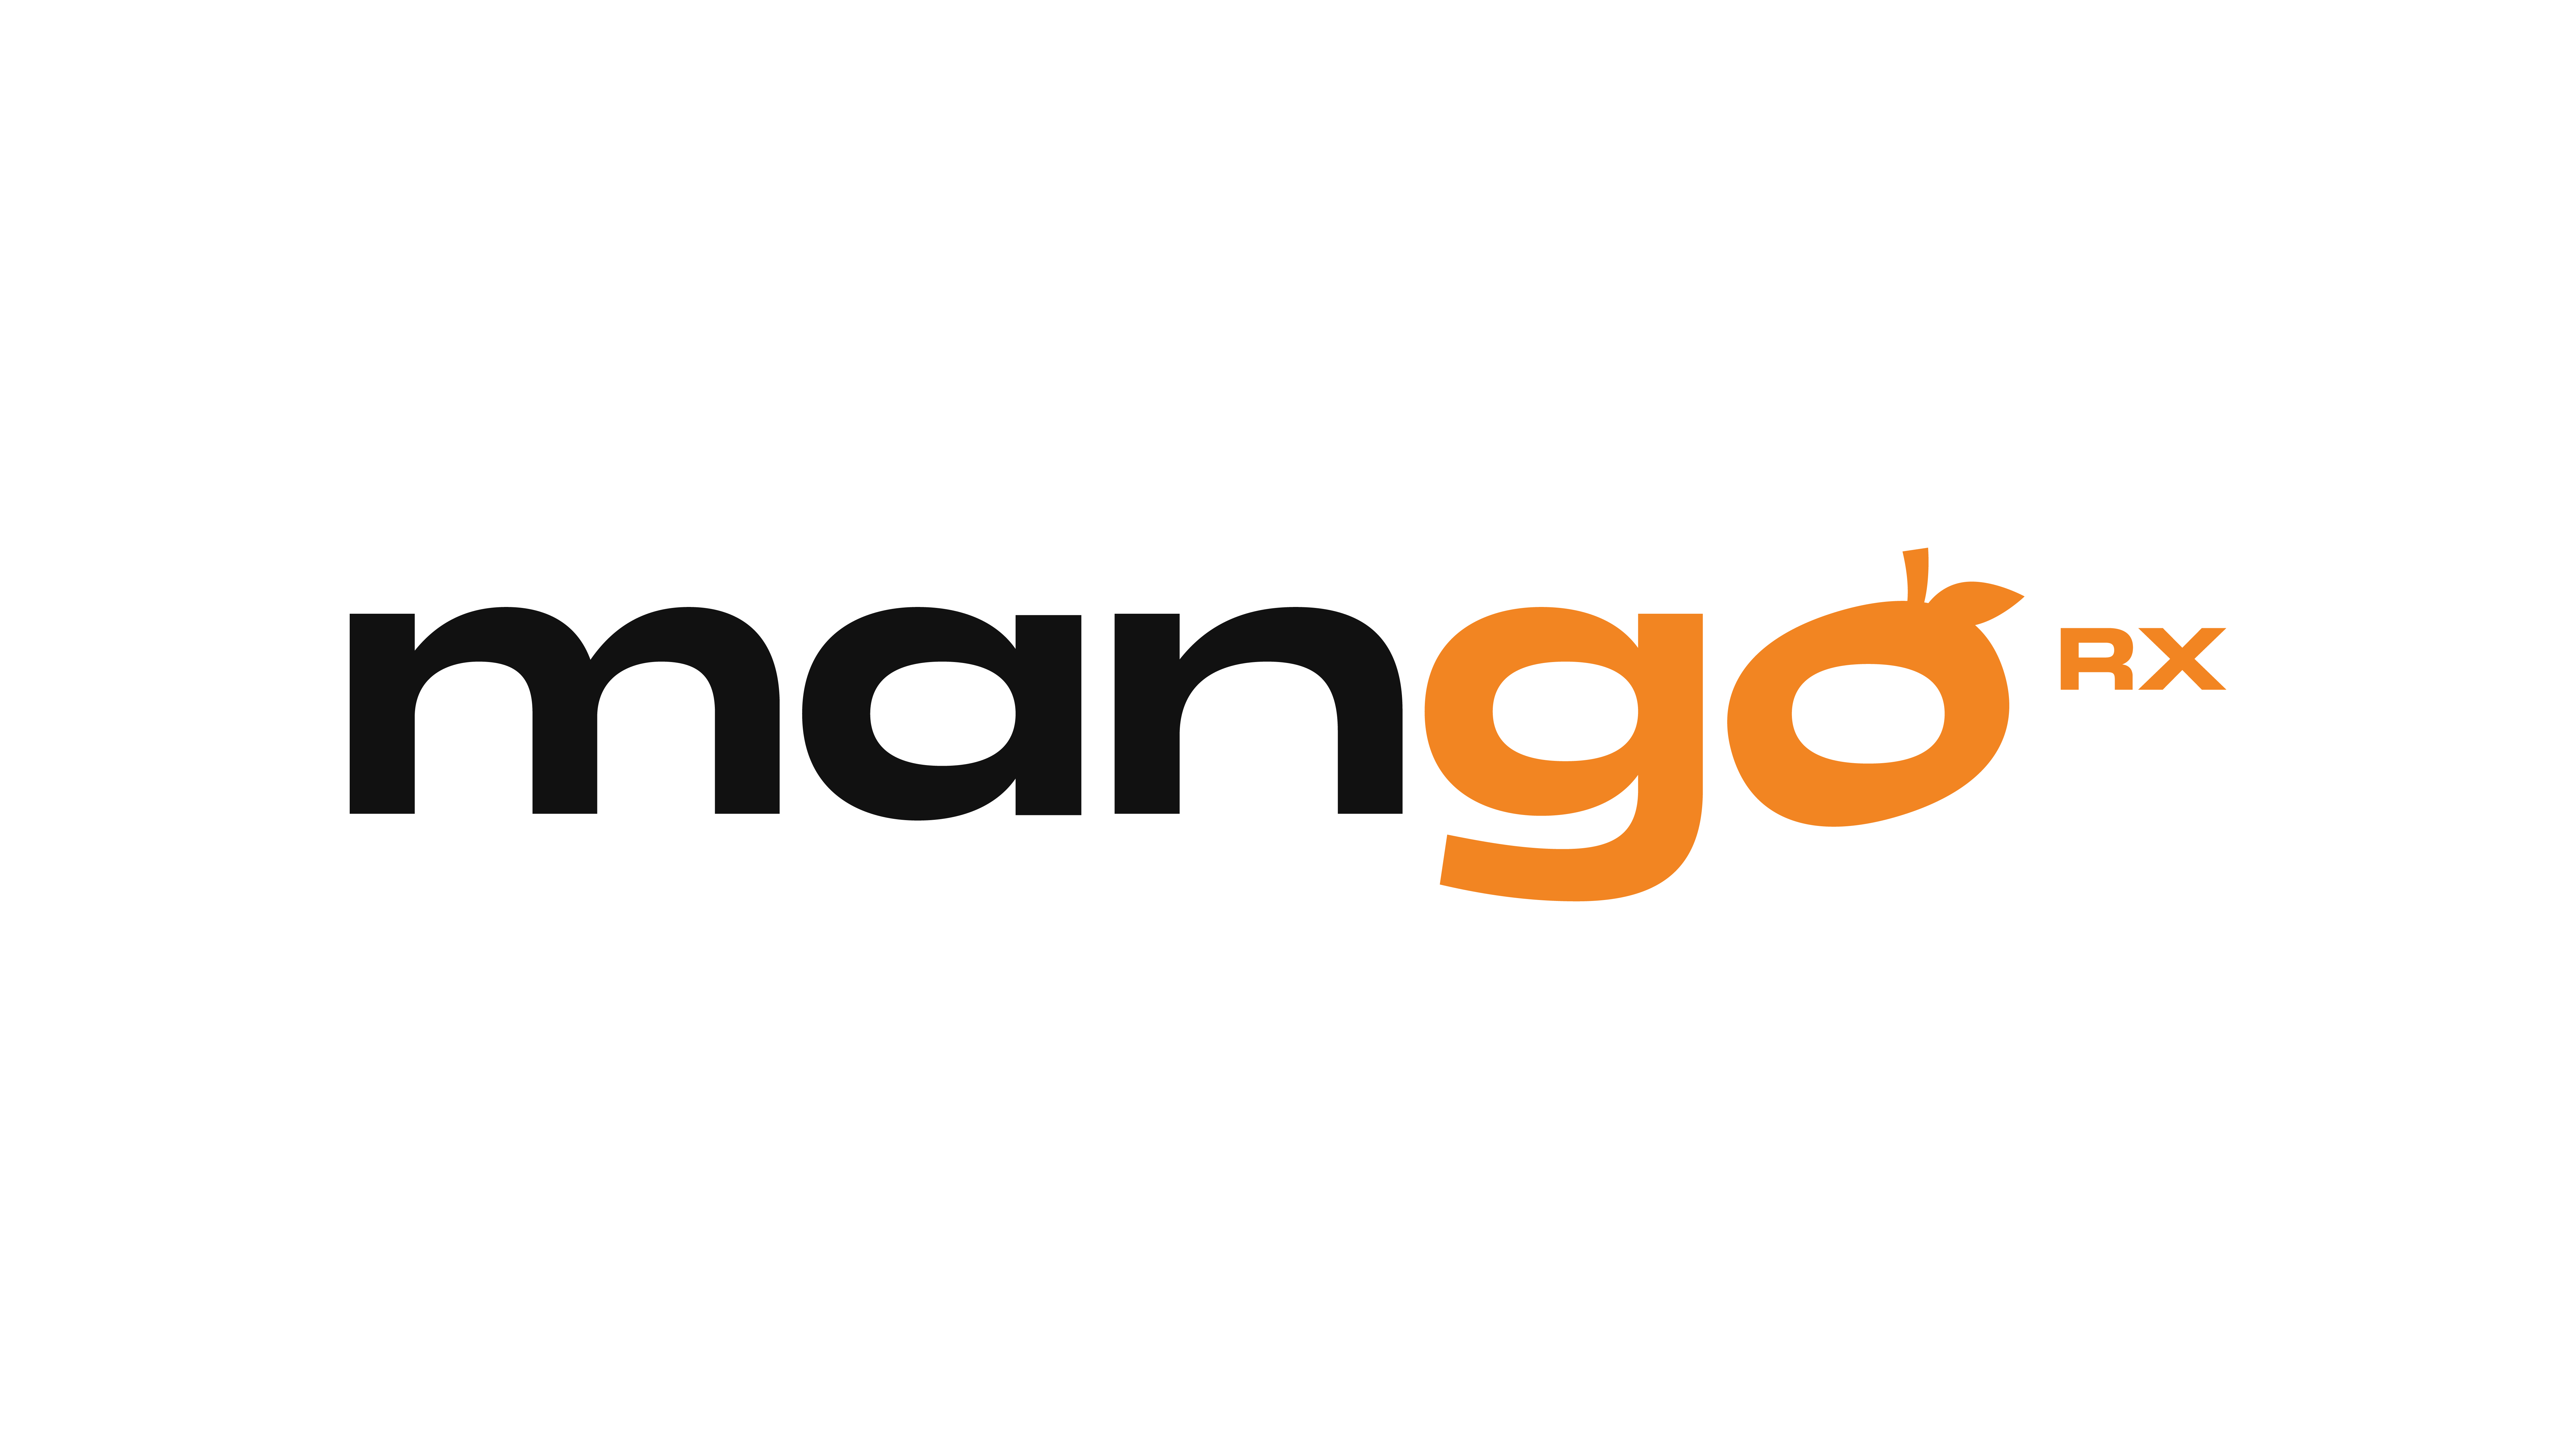 Mangoceuticals Expands its Nationwide Marketing Efforts with a Multiplatform Audio Powerhouse Across America